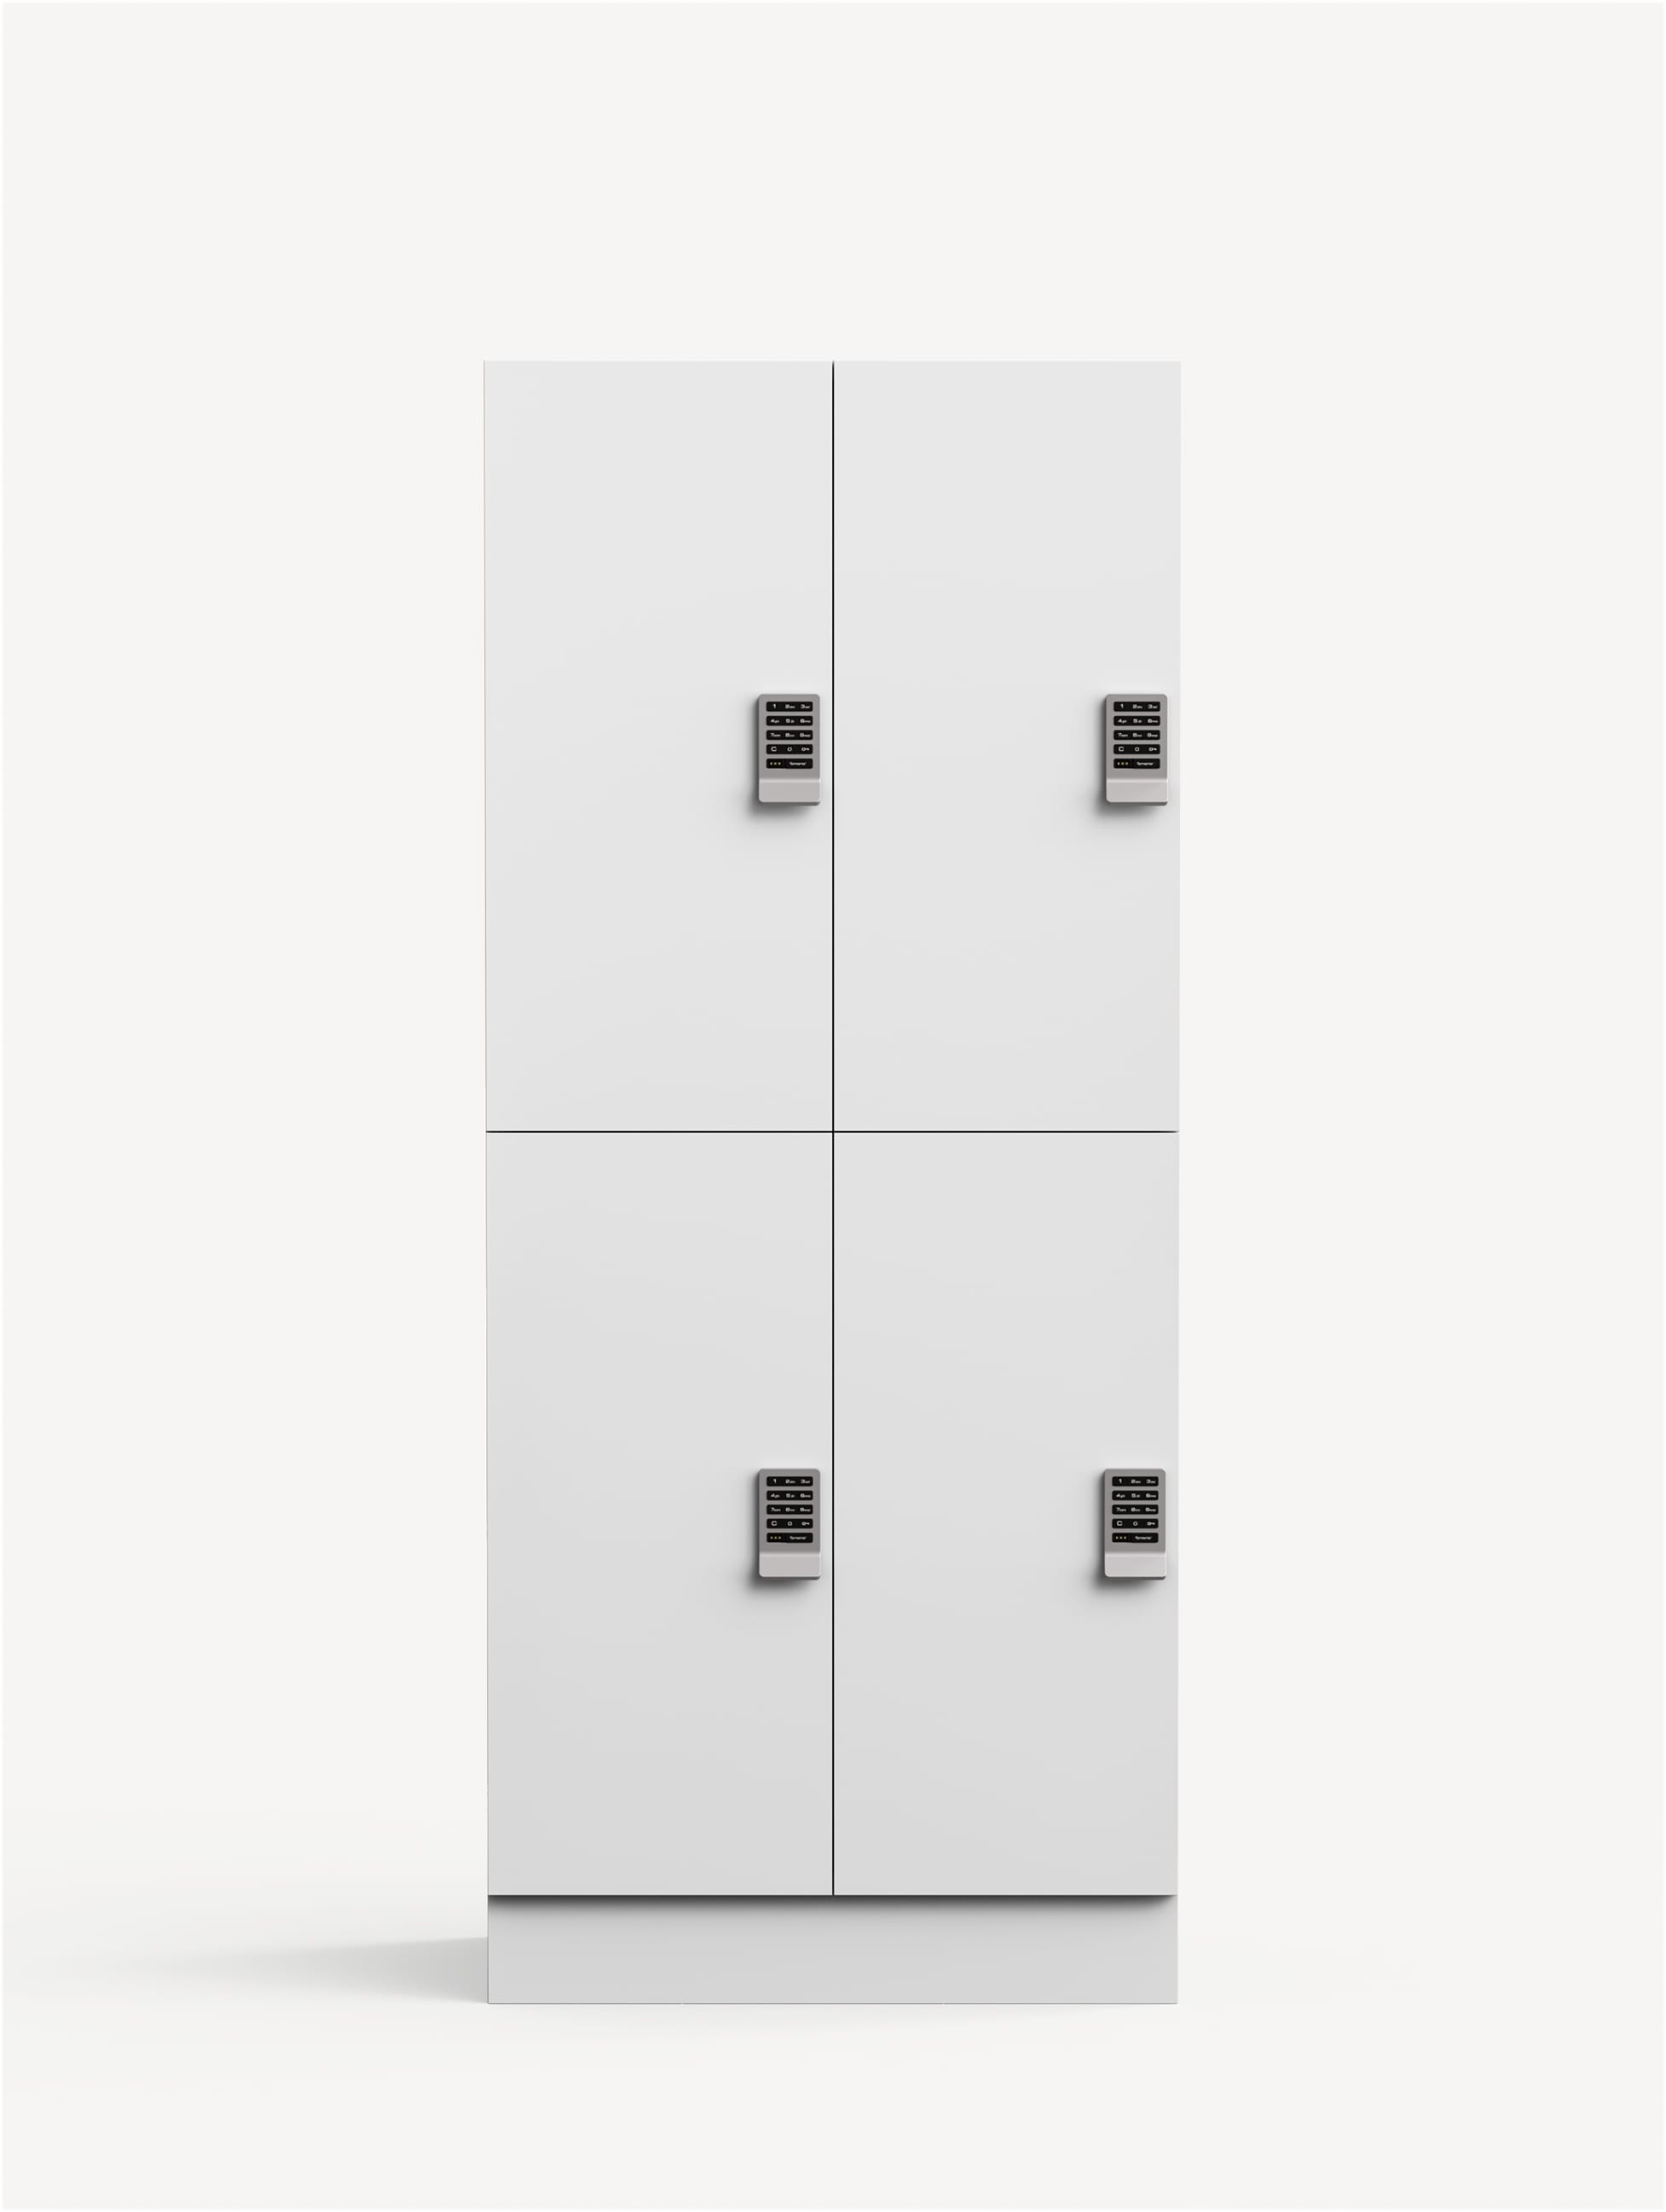 Align Quad Locker in white with a recessed plinth base.